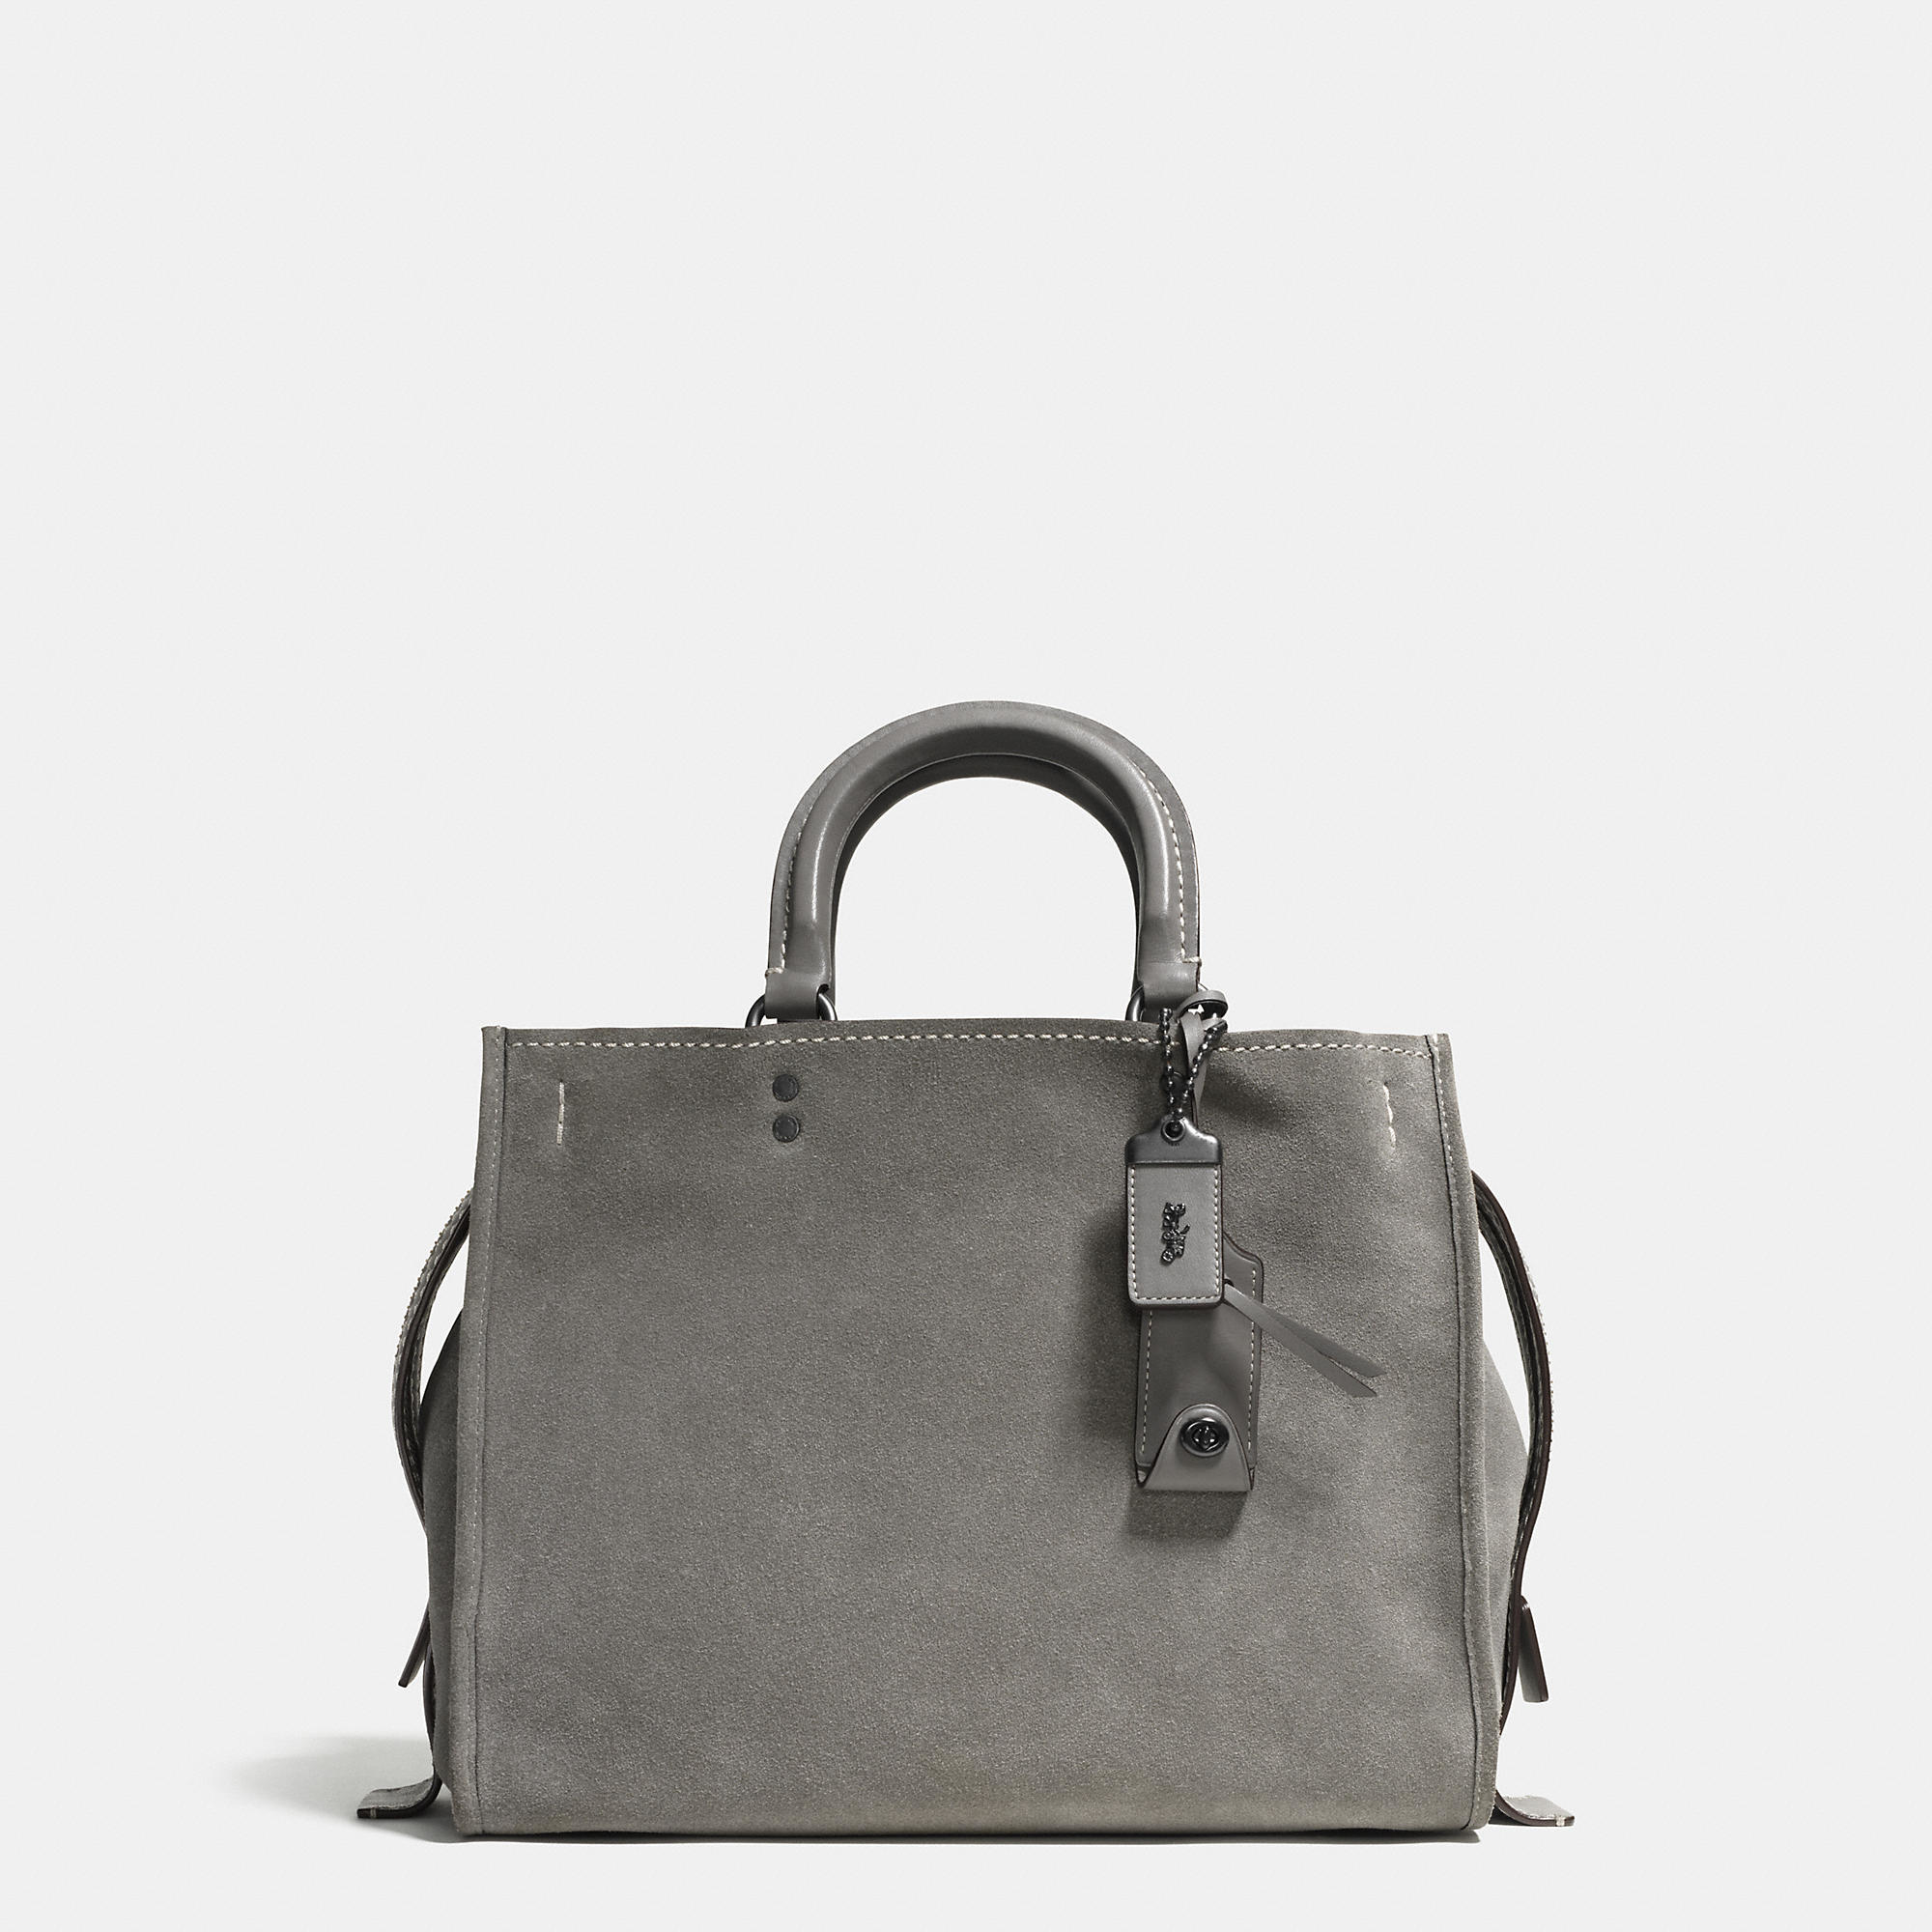 Lyst - Coach Rogue Suede Tote Bag in Gray